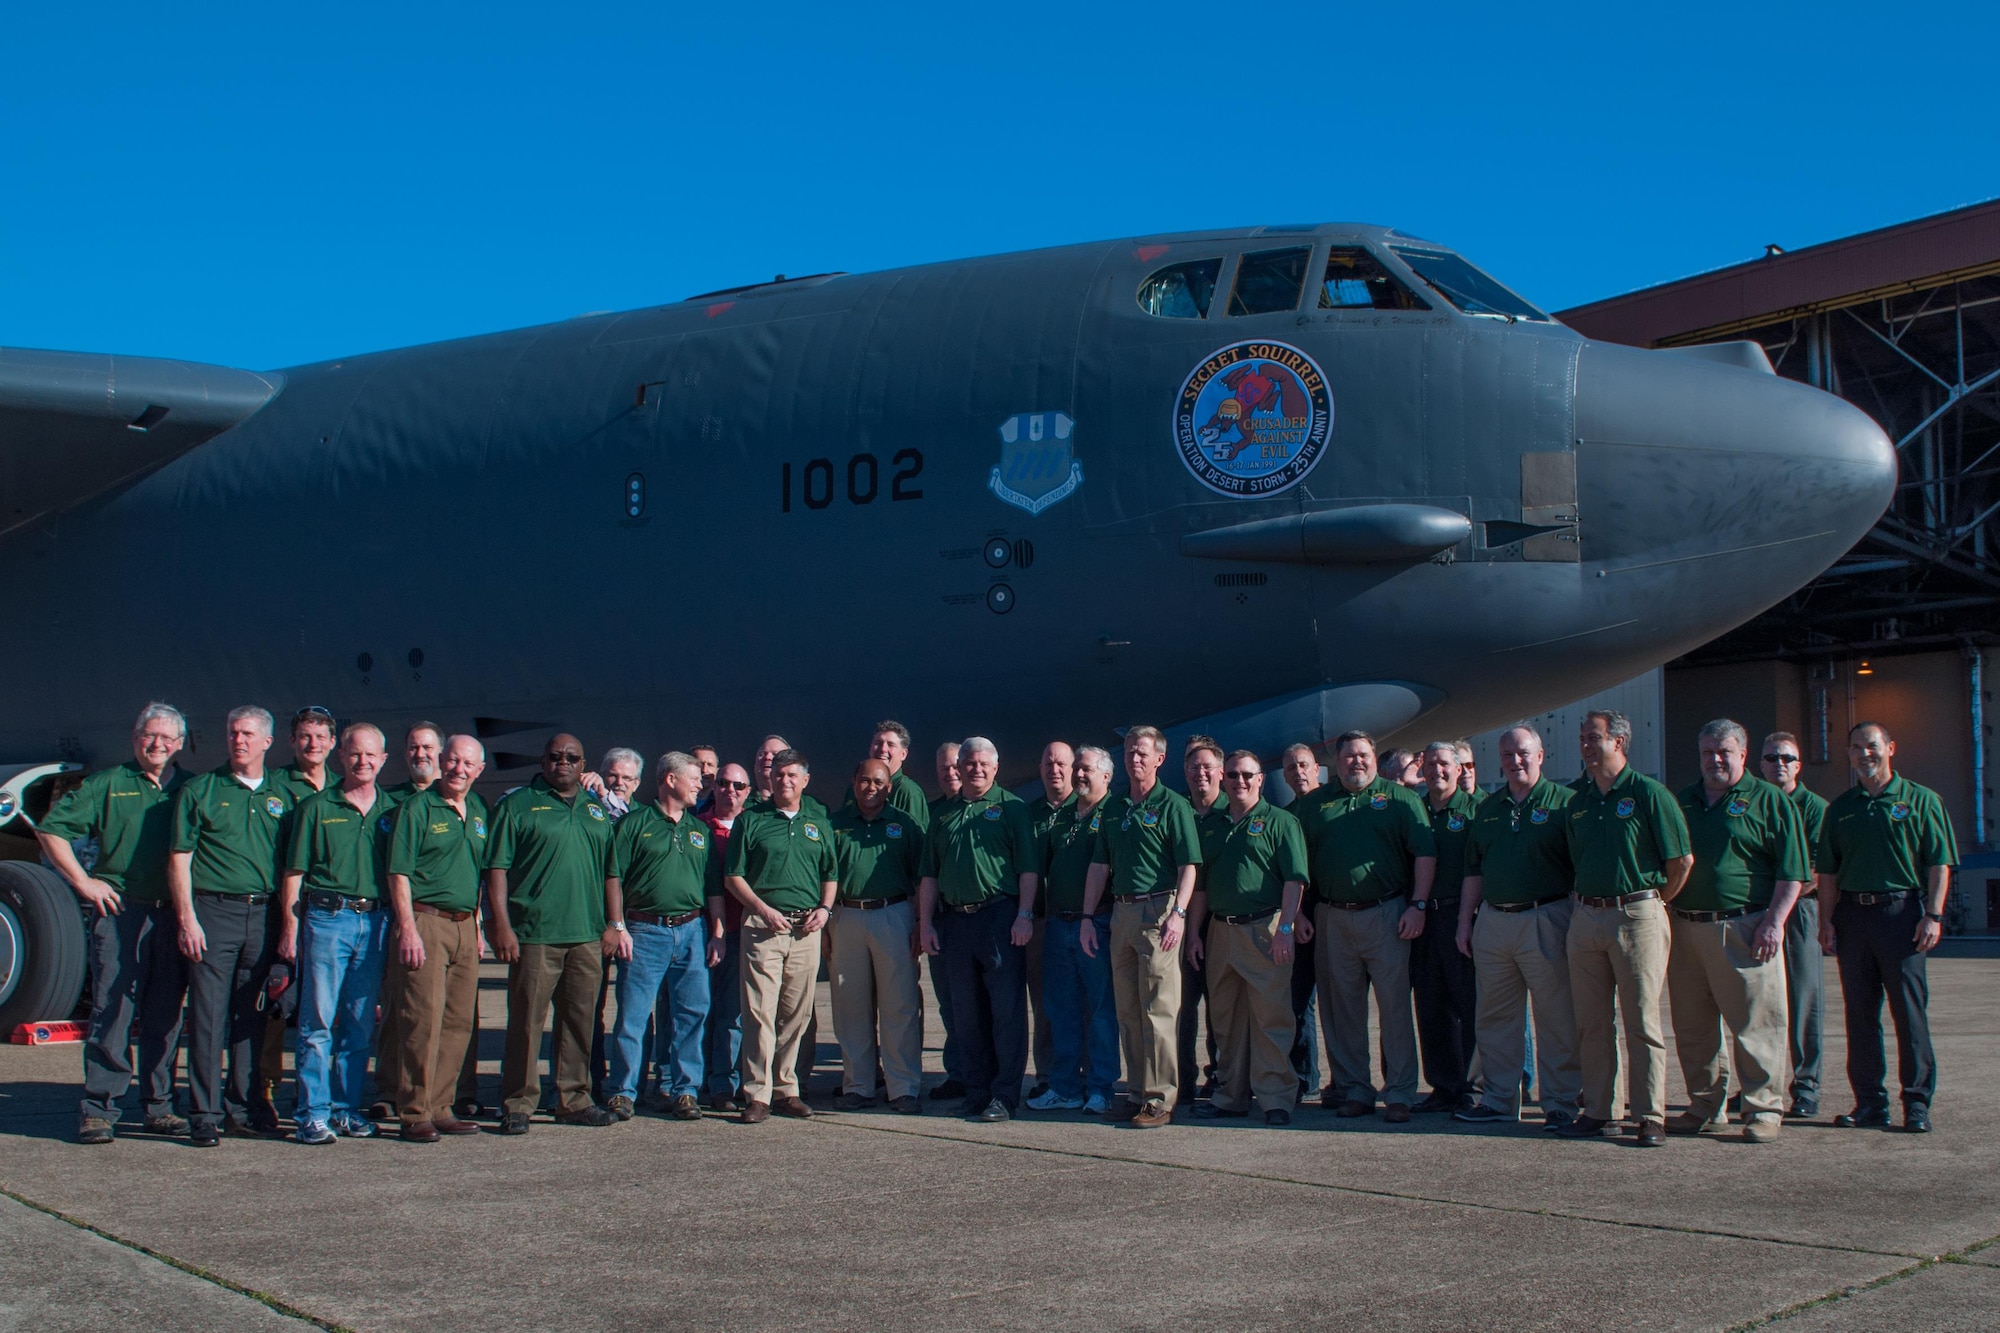 Twenty-five years after Operation Senior Surprise, aka “Secret Squirrel”, the aircrew members that kicked off Operation Desert Storm reunited on Barksdale Air Force Base, La. on Jan. 15, 2016. One of the B-52 Stratofortress bombers stationed at Barksdale is displaying the “Secret Squirrel” patch to commemorate the anniversary. This 35 hour mission was the first combat use of the Conventional Air Launched Cruise Missile (CALCM). (U.S. Air Force photo by Master Sgt. Dachelle Melville/Released)